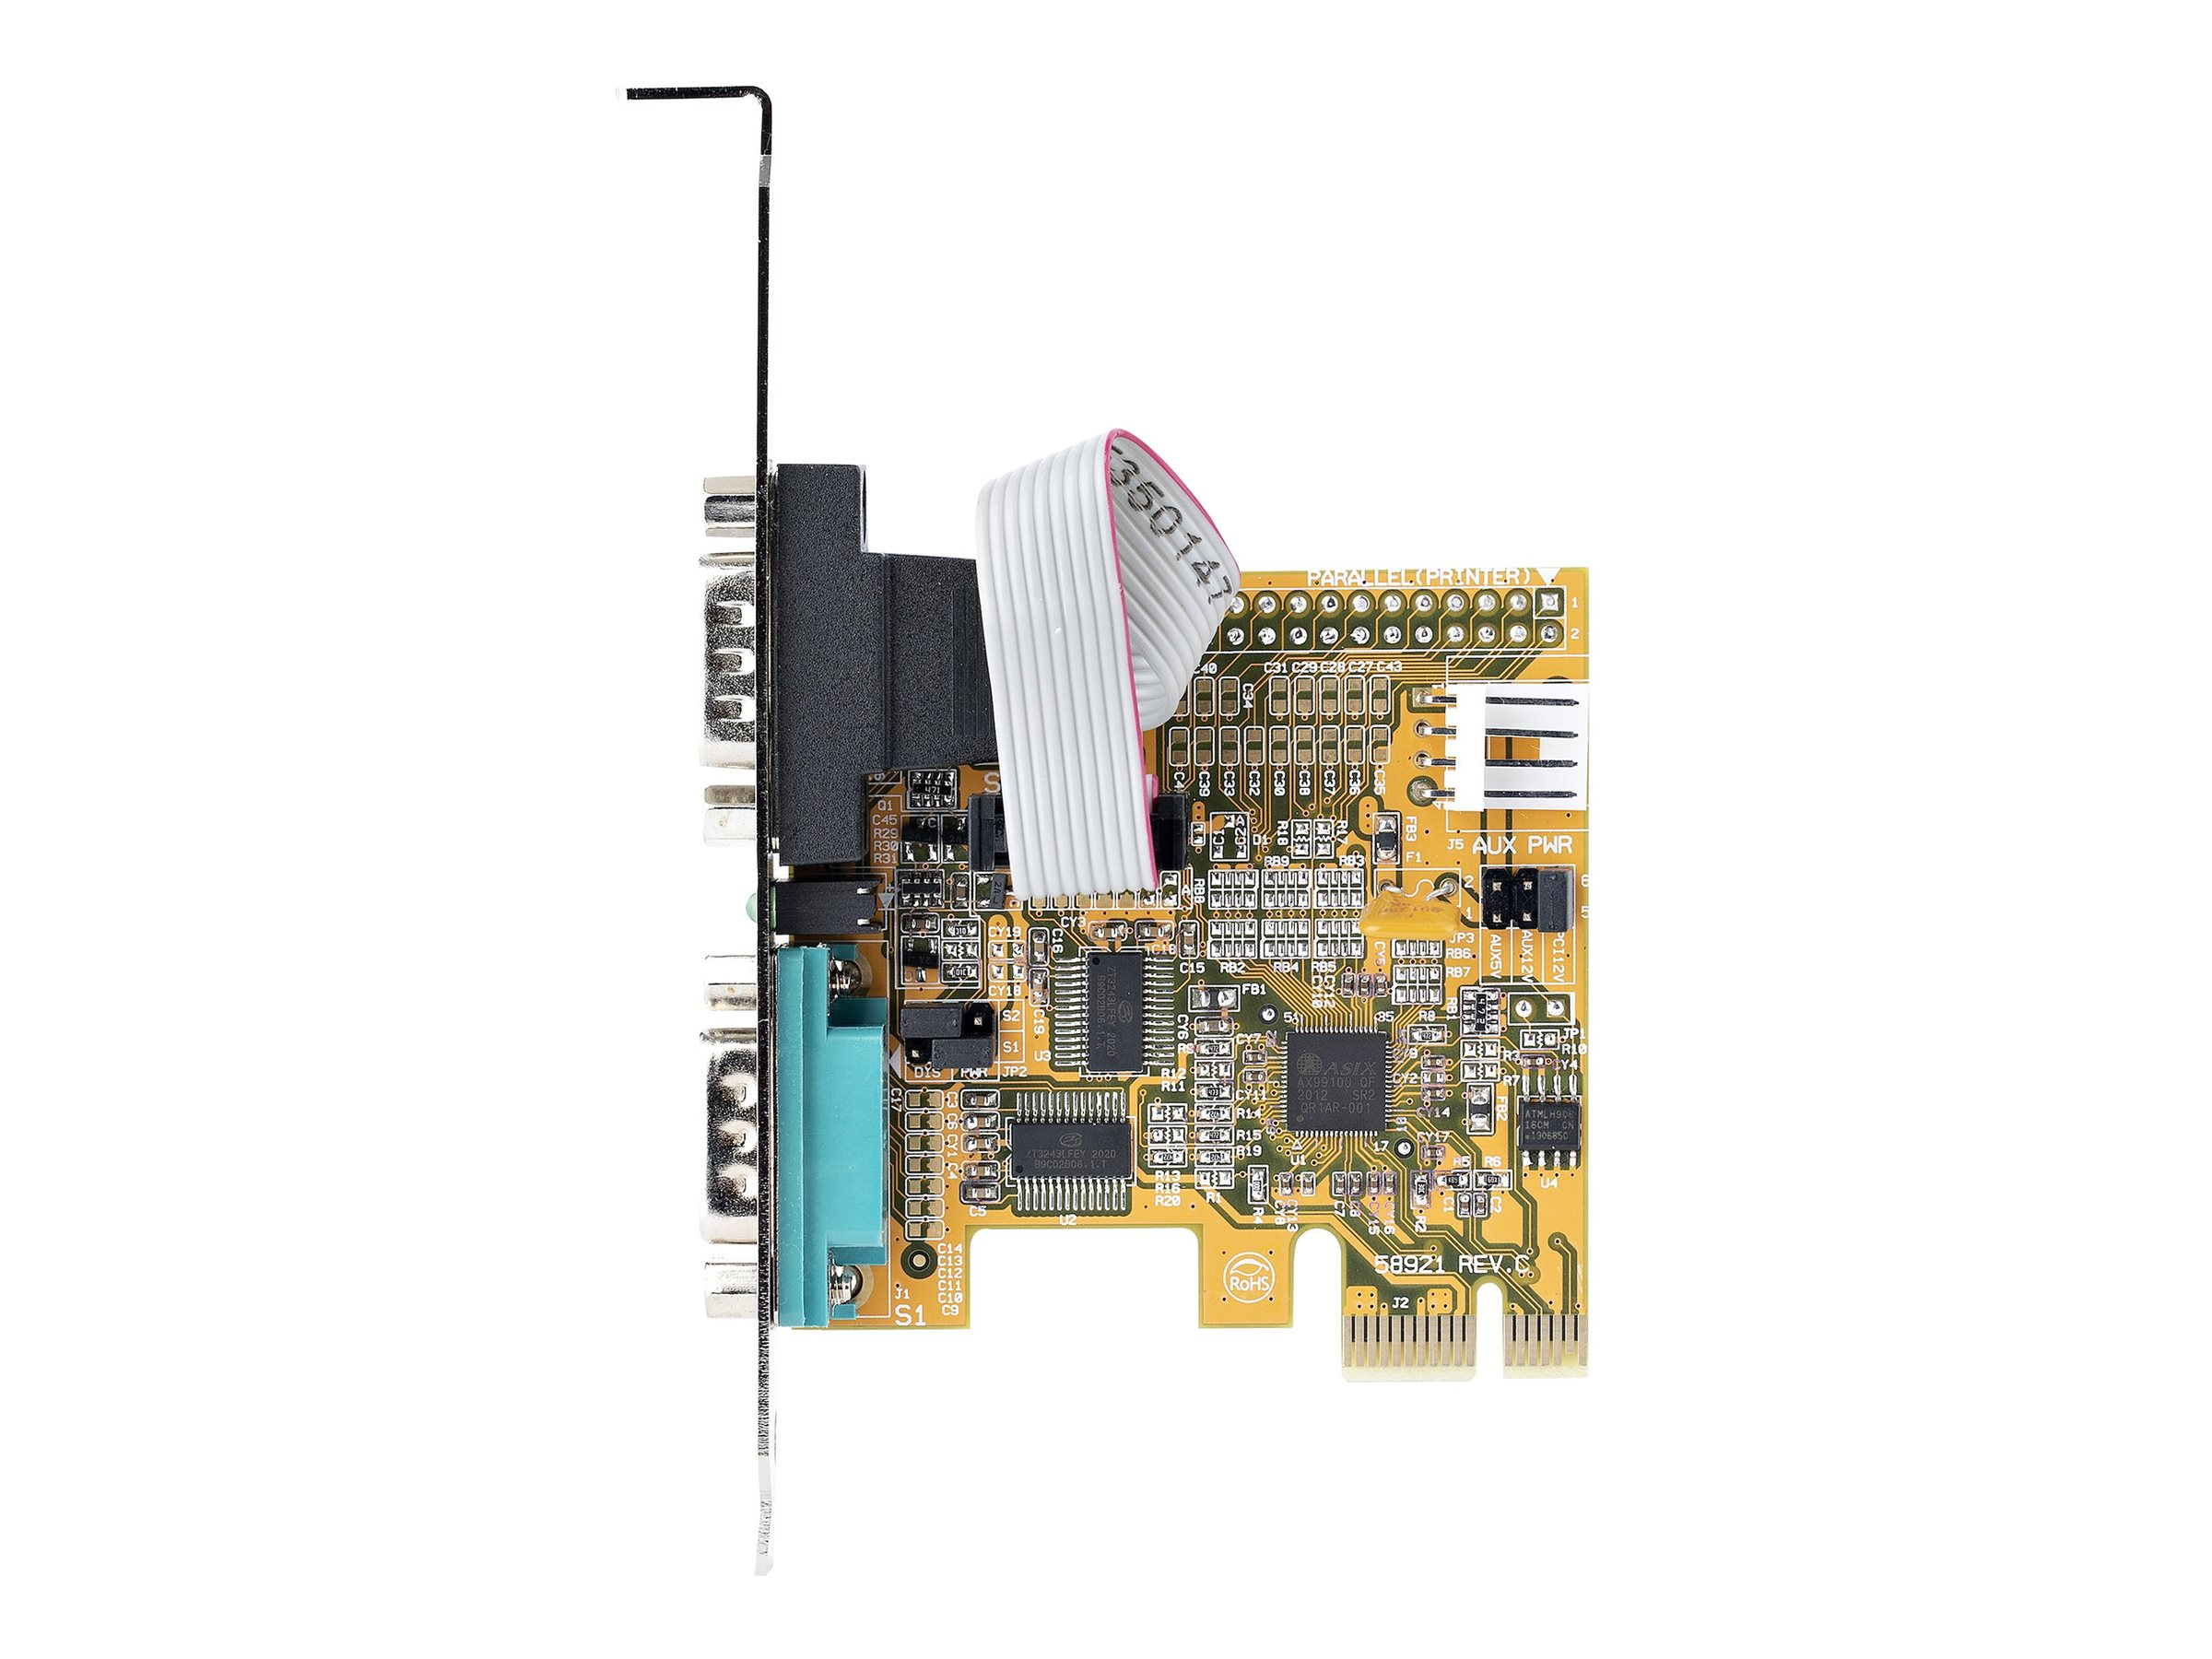 StarTech.com 2-Port PCI Express Serial Card, Dual Port PCIe to RS232 (DB9) Serial Interface Card, 16C1050 UART, Standard or Low 